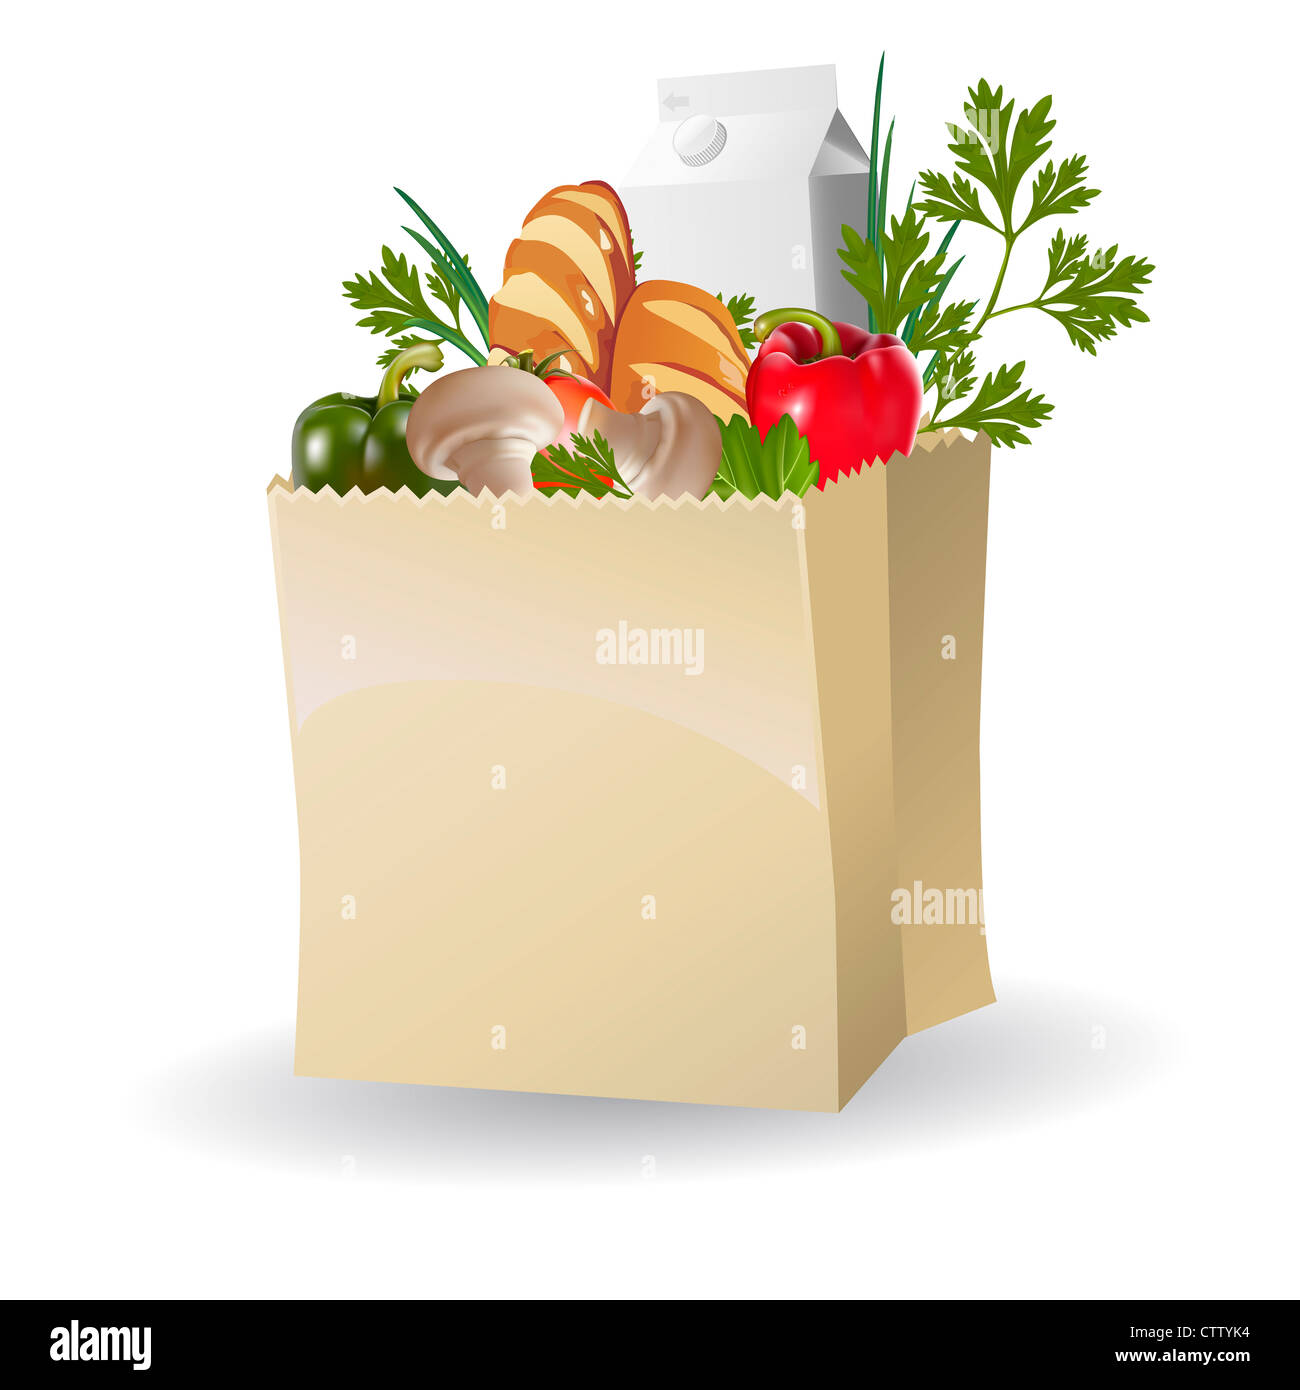 Isolated Vegetables, milk and bread in paper bags Stock Photo